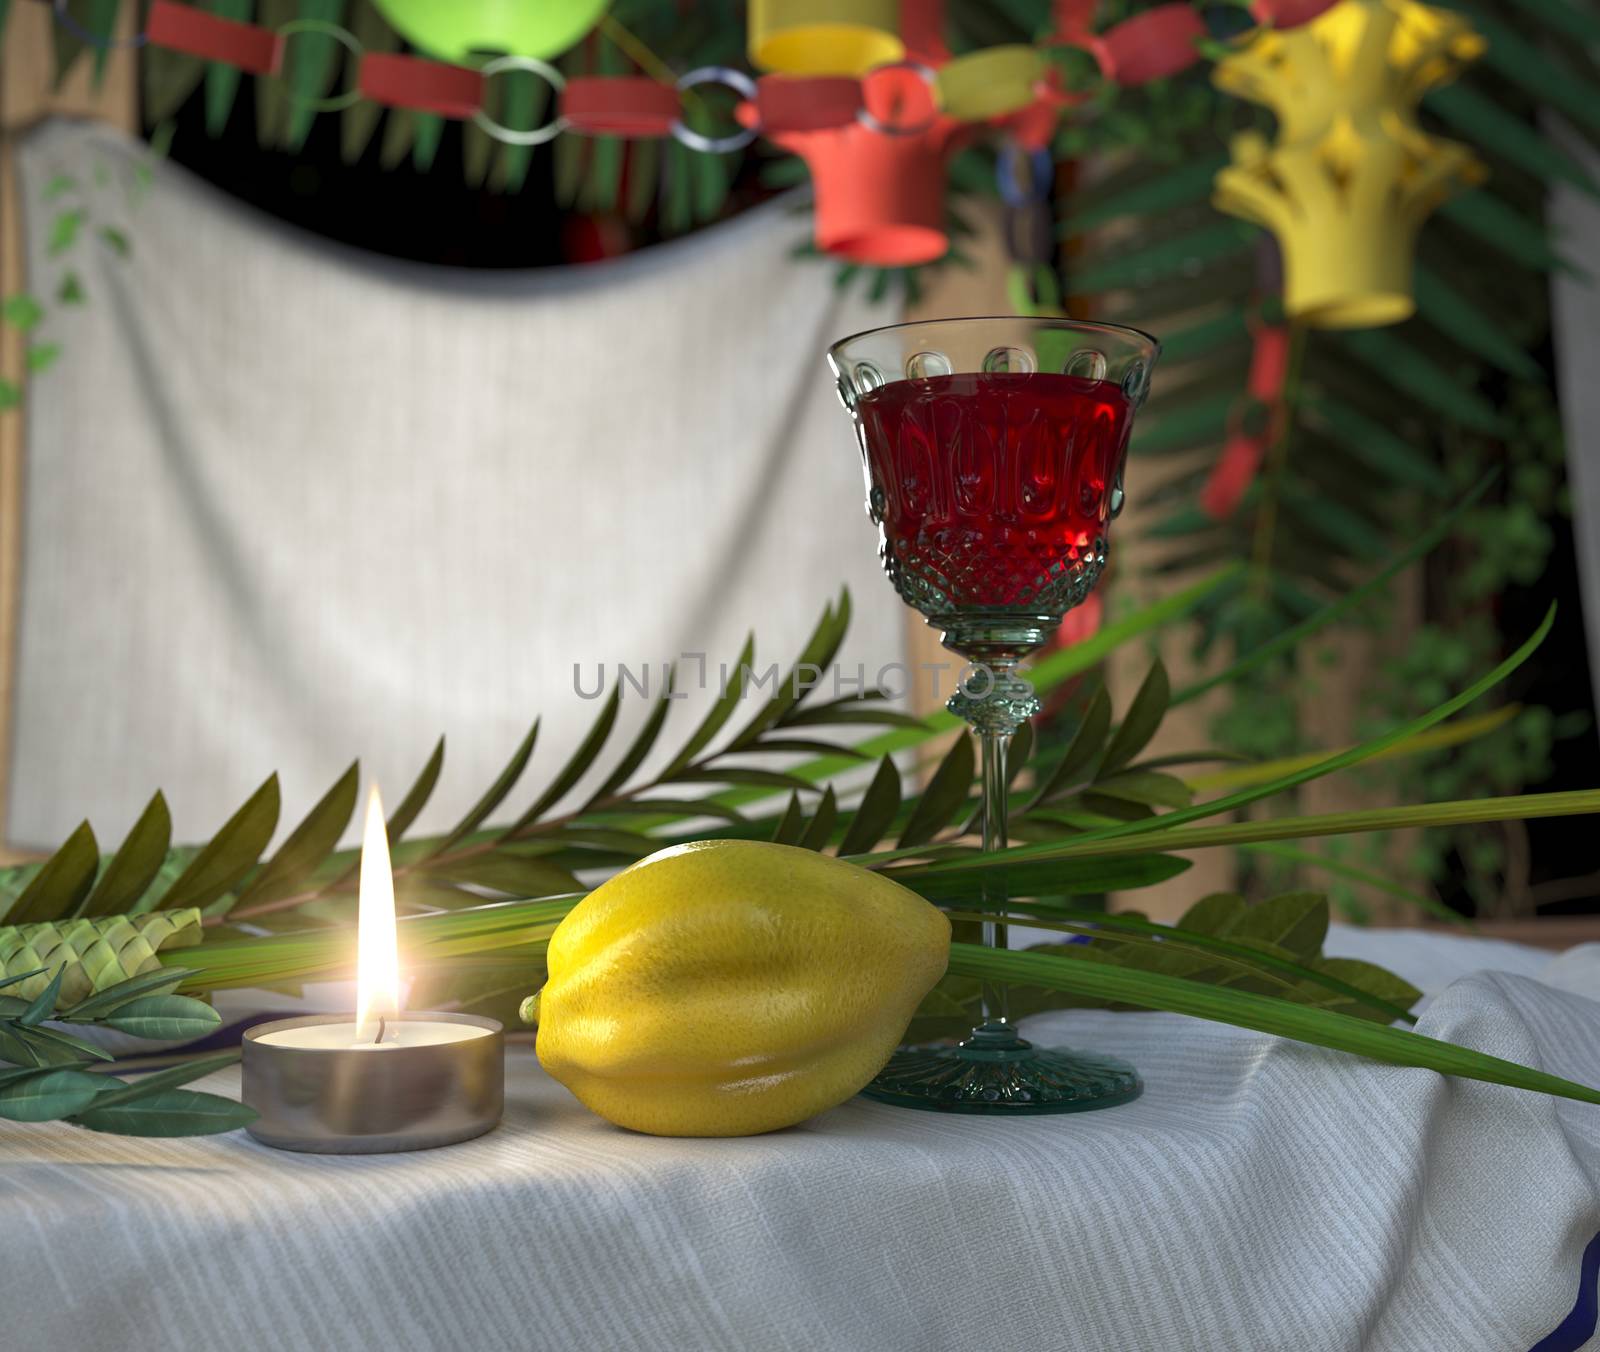 Symbols of the Jewish holiday Sukkot with candle and wine glass by denisgo